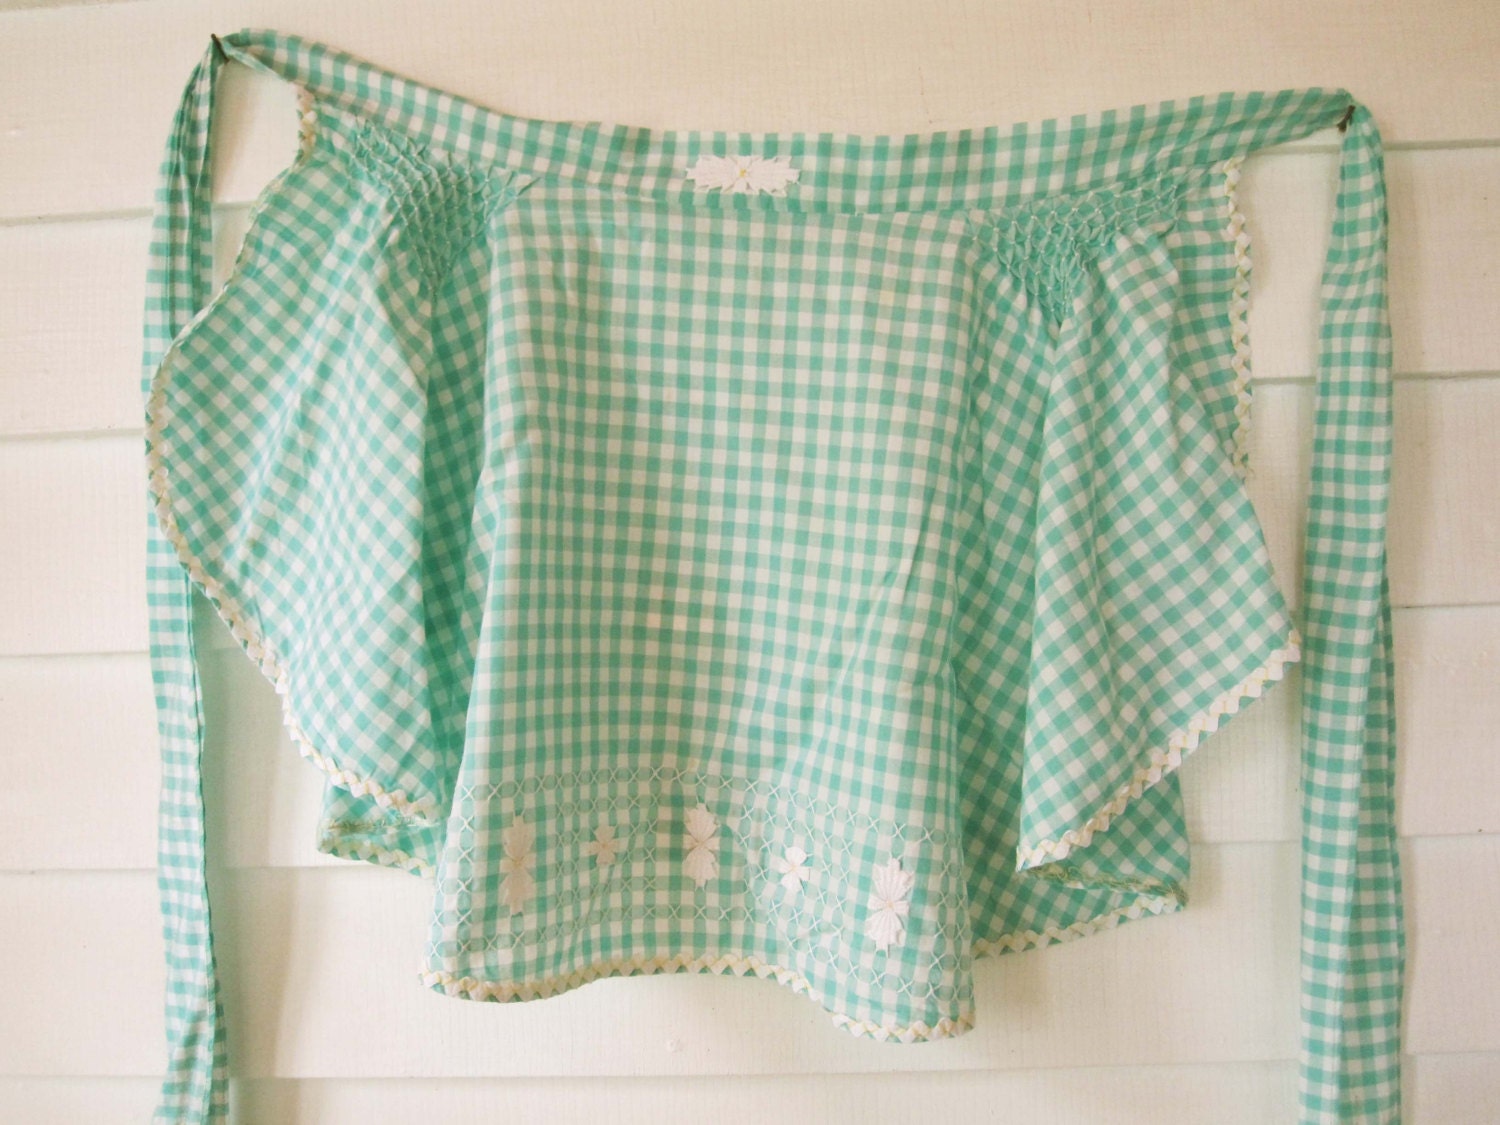 Wow Aqua and White Gingham Apron With White Smocking, Flower Appliques and Light Touches of Yellow Throughout -  Aquamarine, Teal - Kitchen - AllVintageFabrics